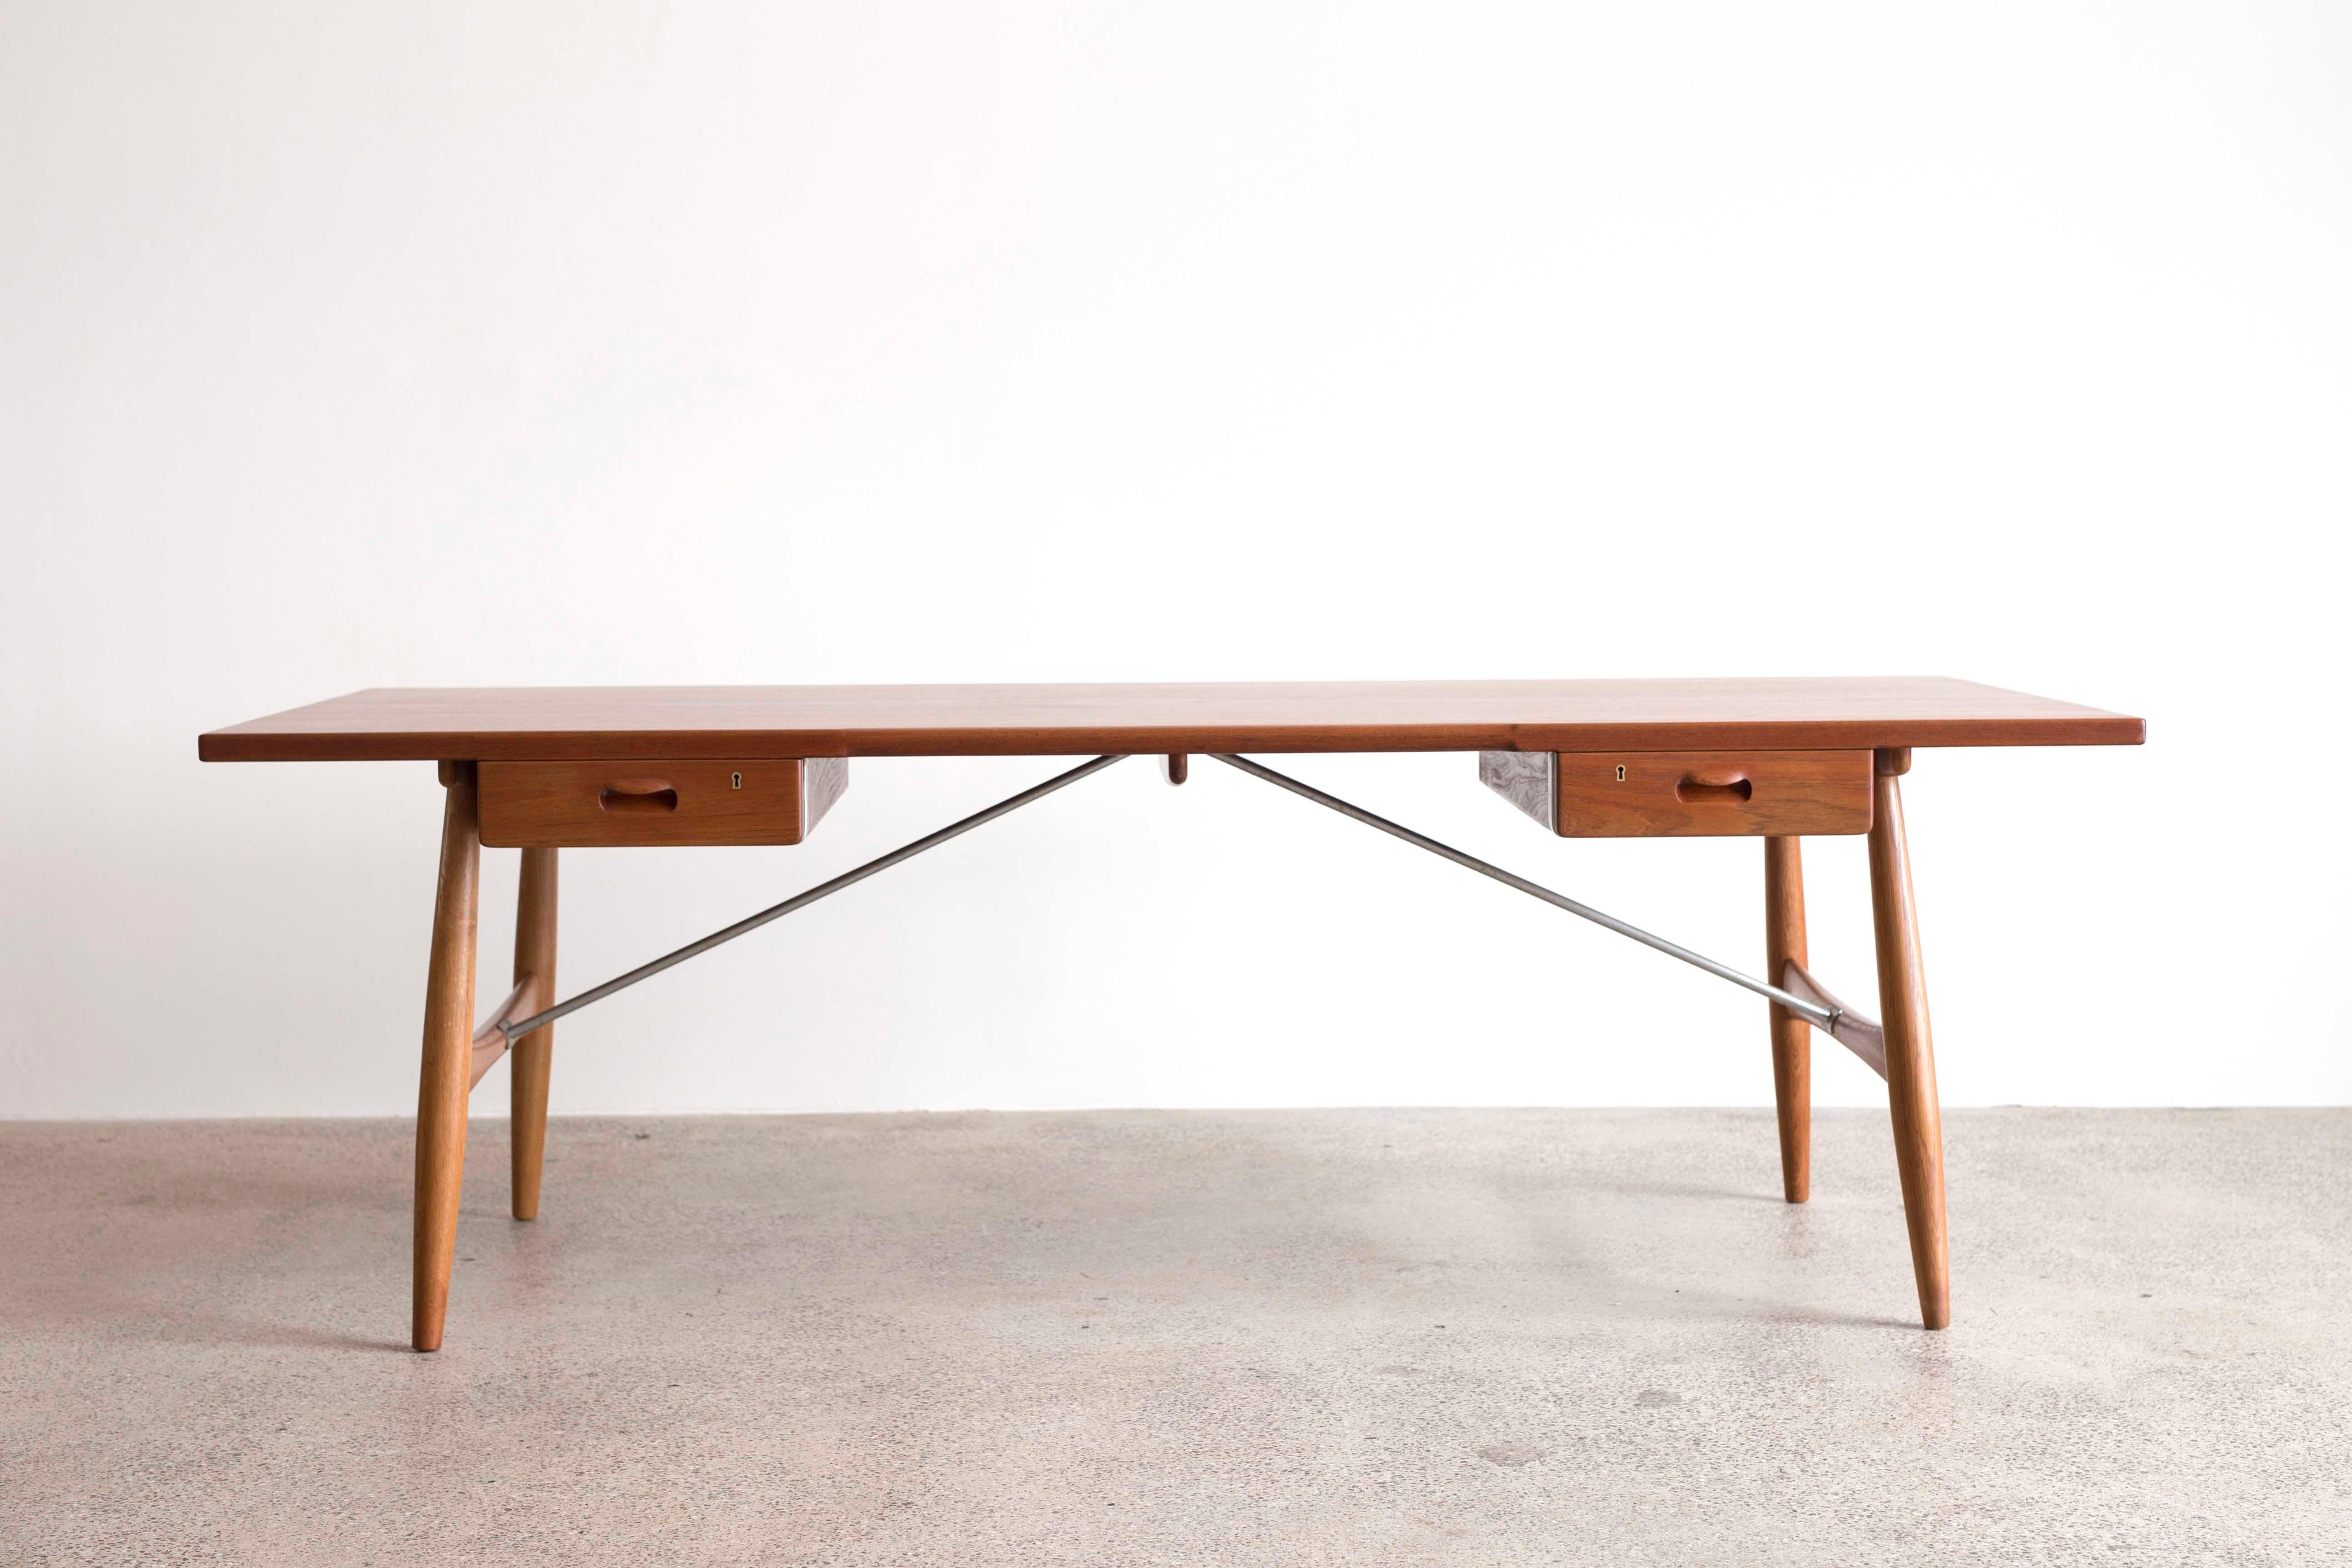 Hans J. Wegner 'Architect's desk' designed 1953 and executed at cabinetmaker Johannes Hansen, Denmark, model JH571. Large model. 
Legs of oak, tabletop and drawers of teak with brass and steel details. 
Fine condition.